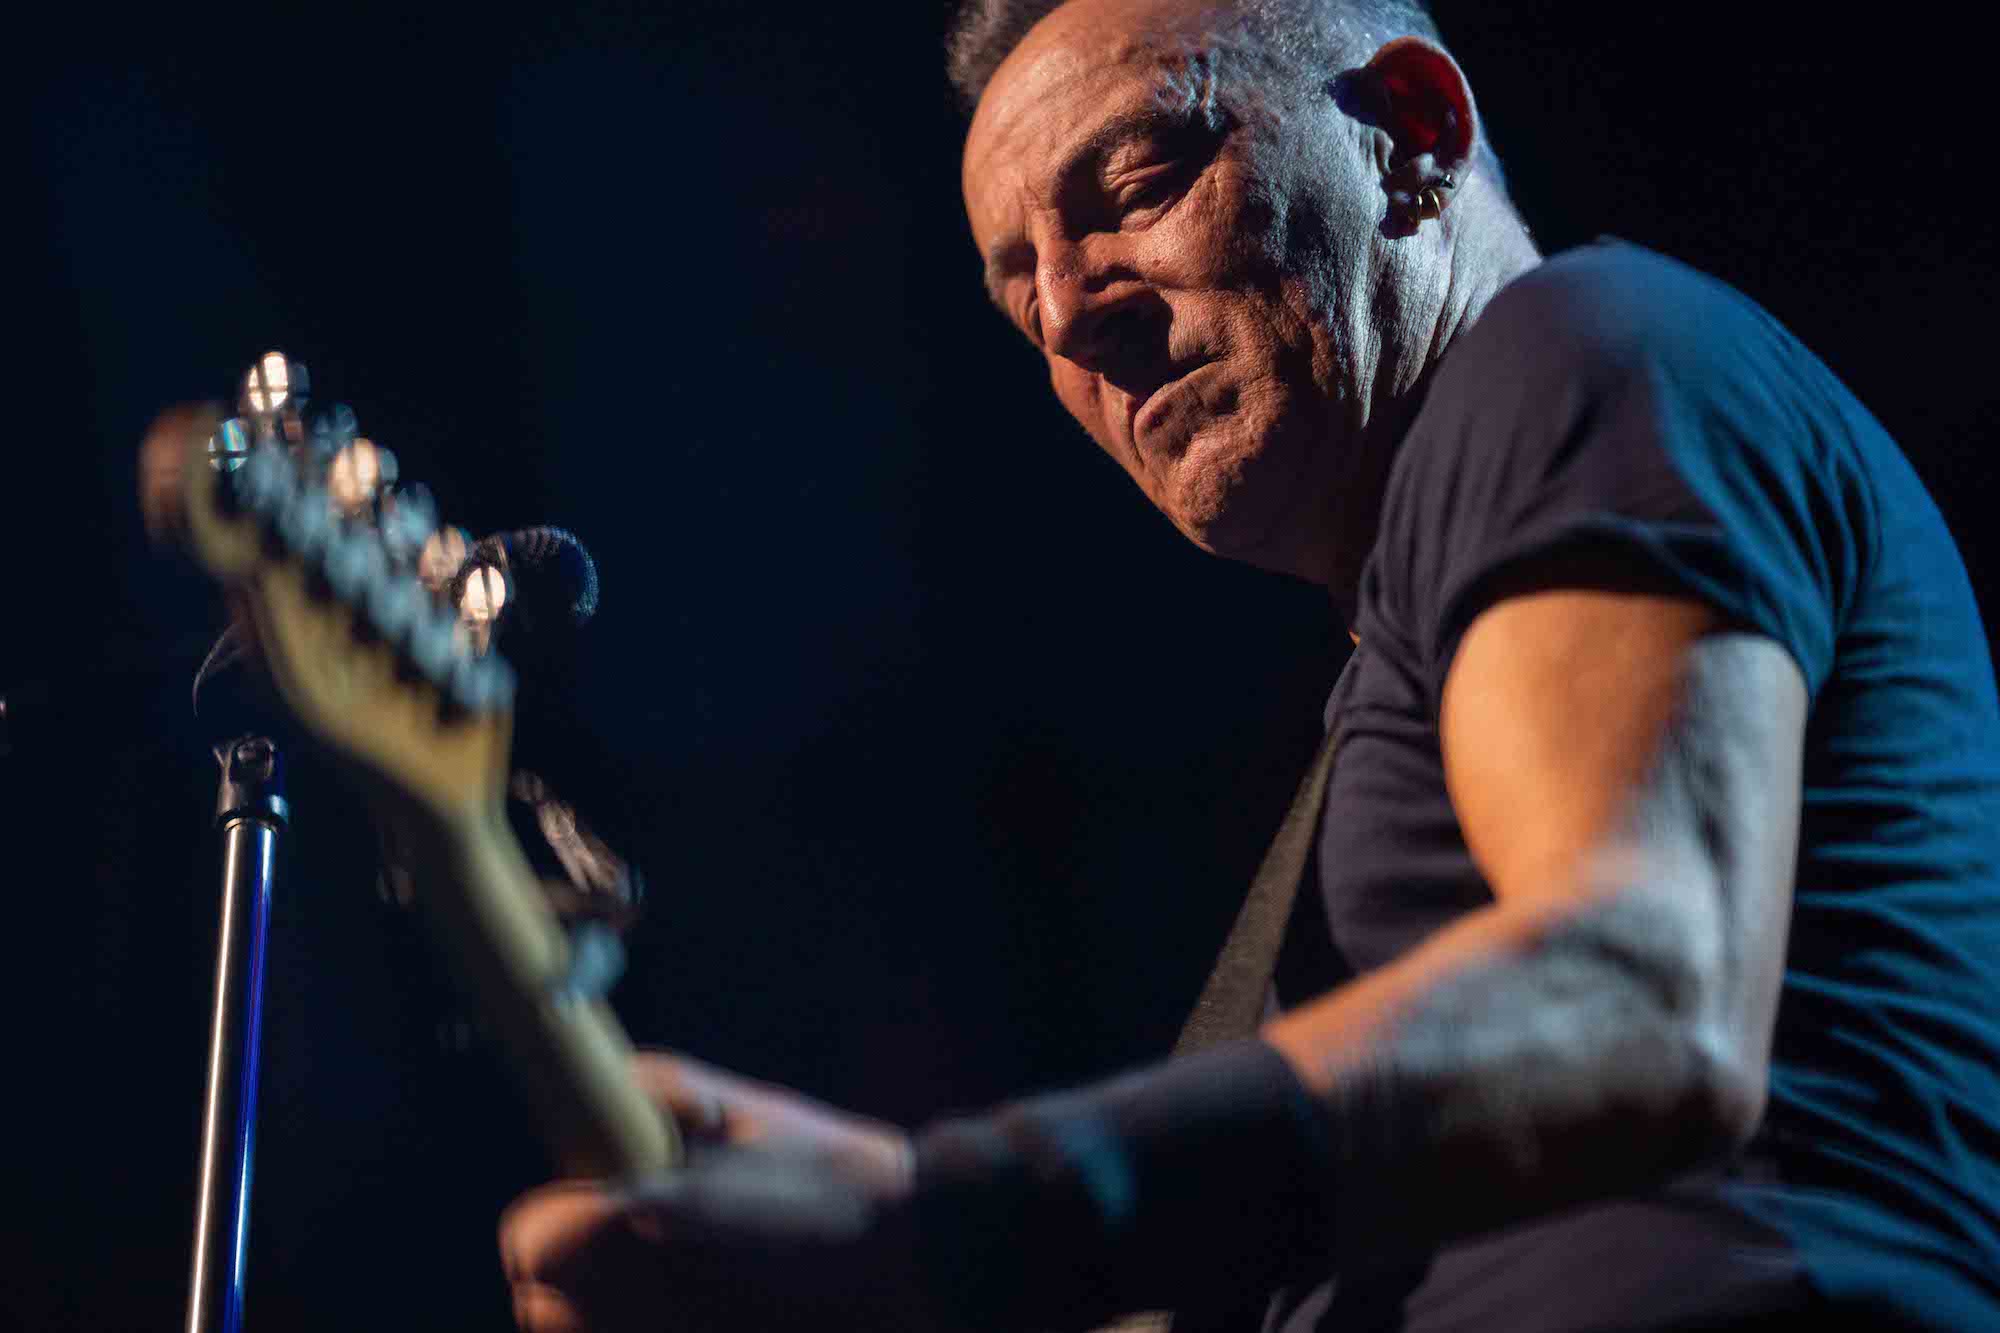 Bruce Springsteen & E Street Band at Hard Rock Live, Hollywood, Florida on February 7, 2023.